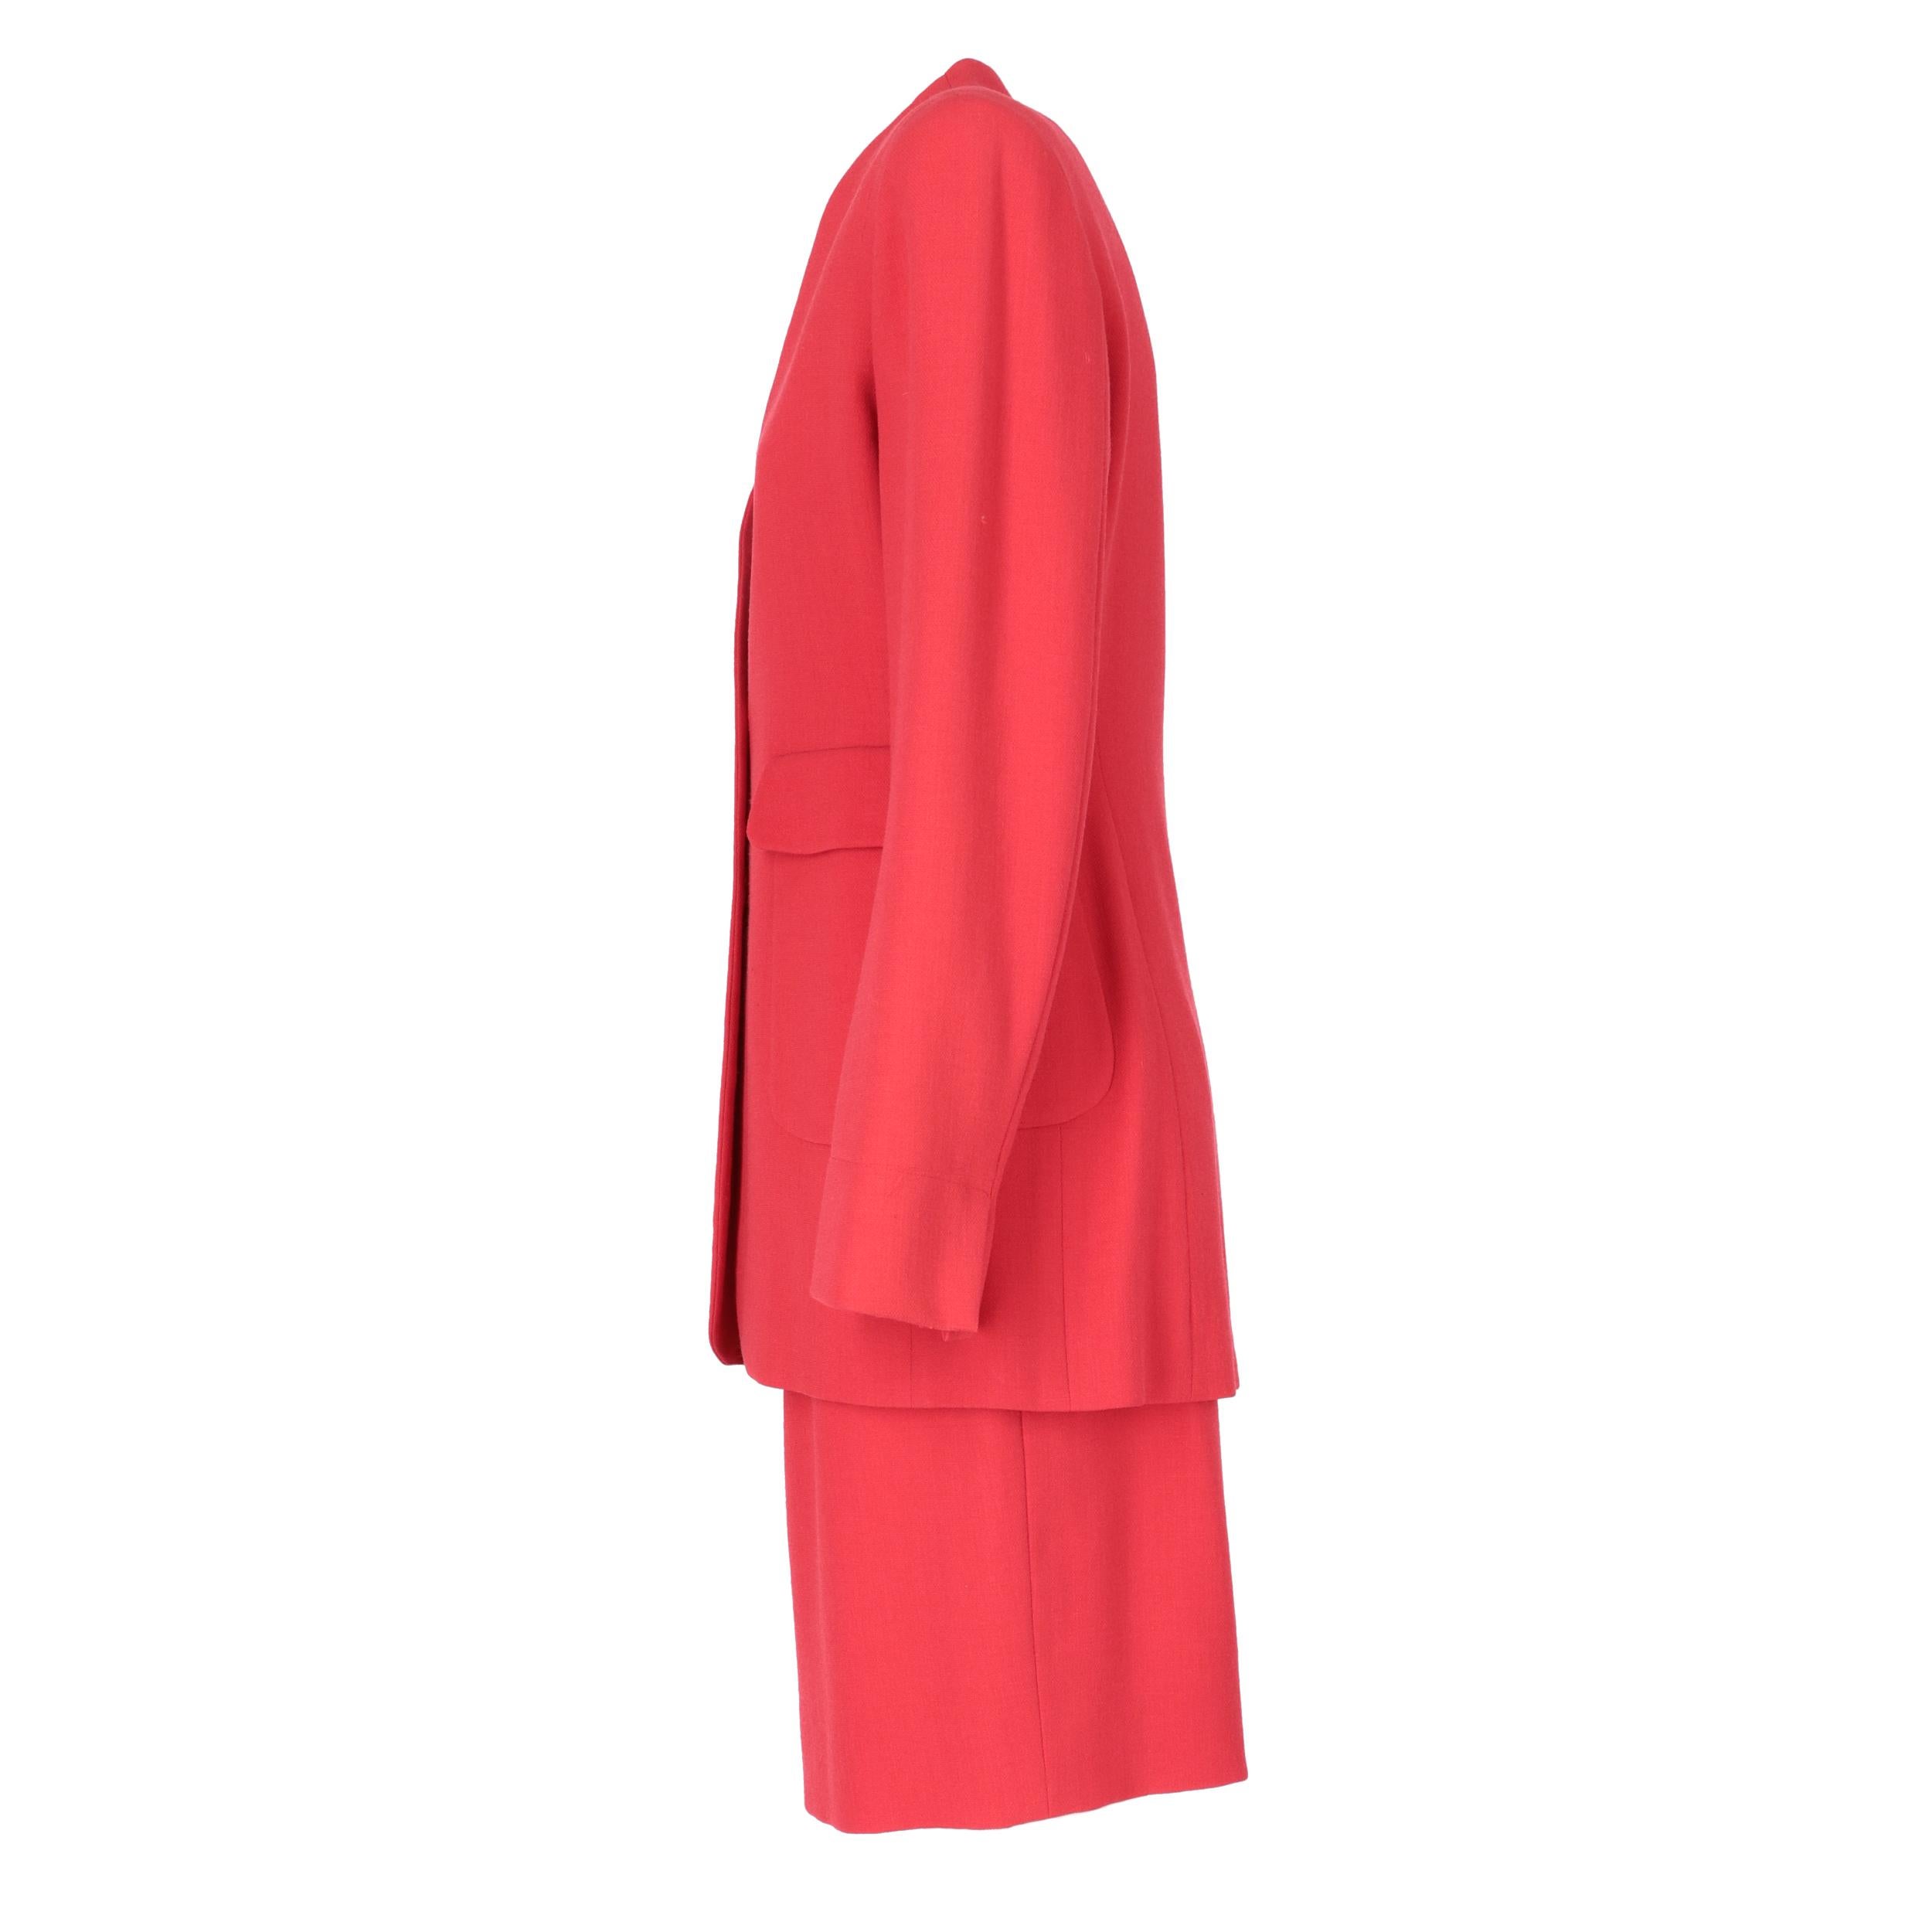 Jil Sander red light wool. V-neck jacket, front button closure and flap pockets. High-waisted straight skirt, above the knee.

The product shows some pulled threads and slight signs of wear on the lining, as shown in the pictures.

Years: 80S

Made